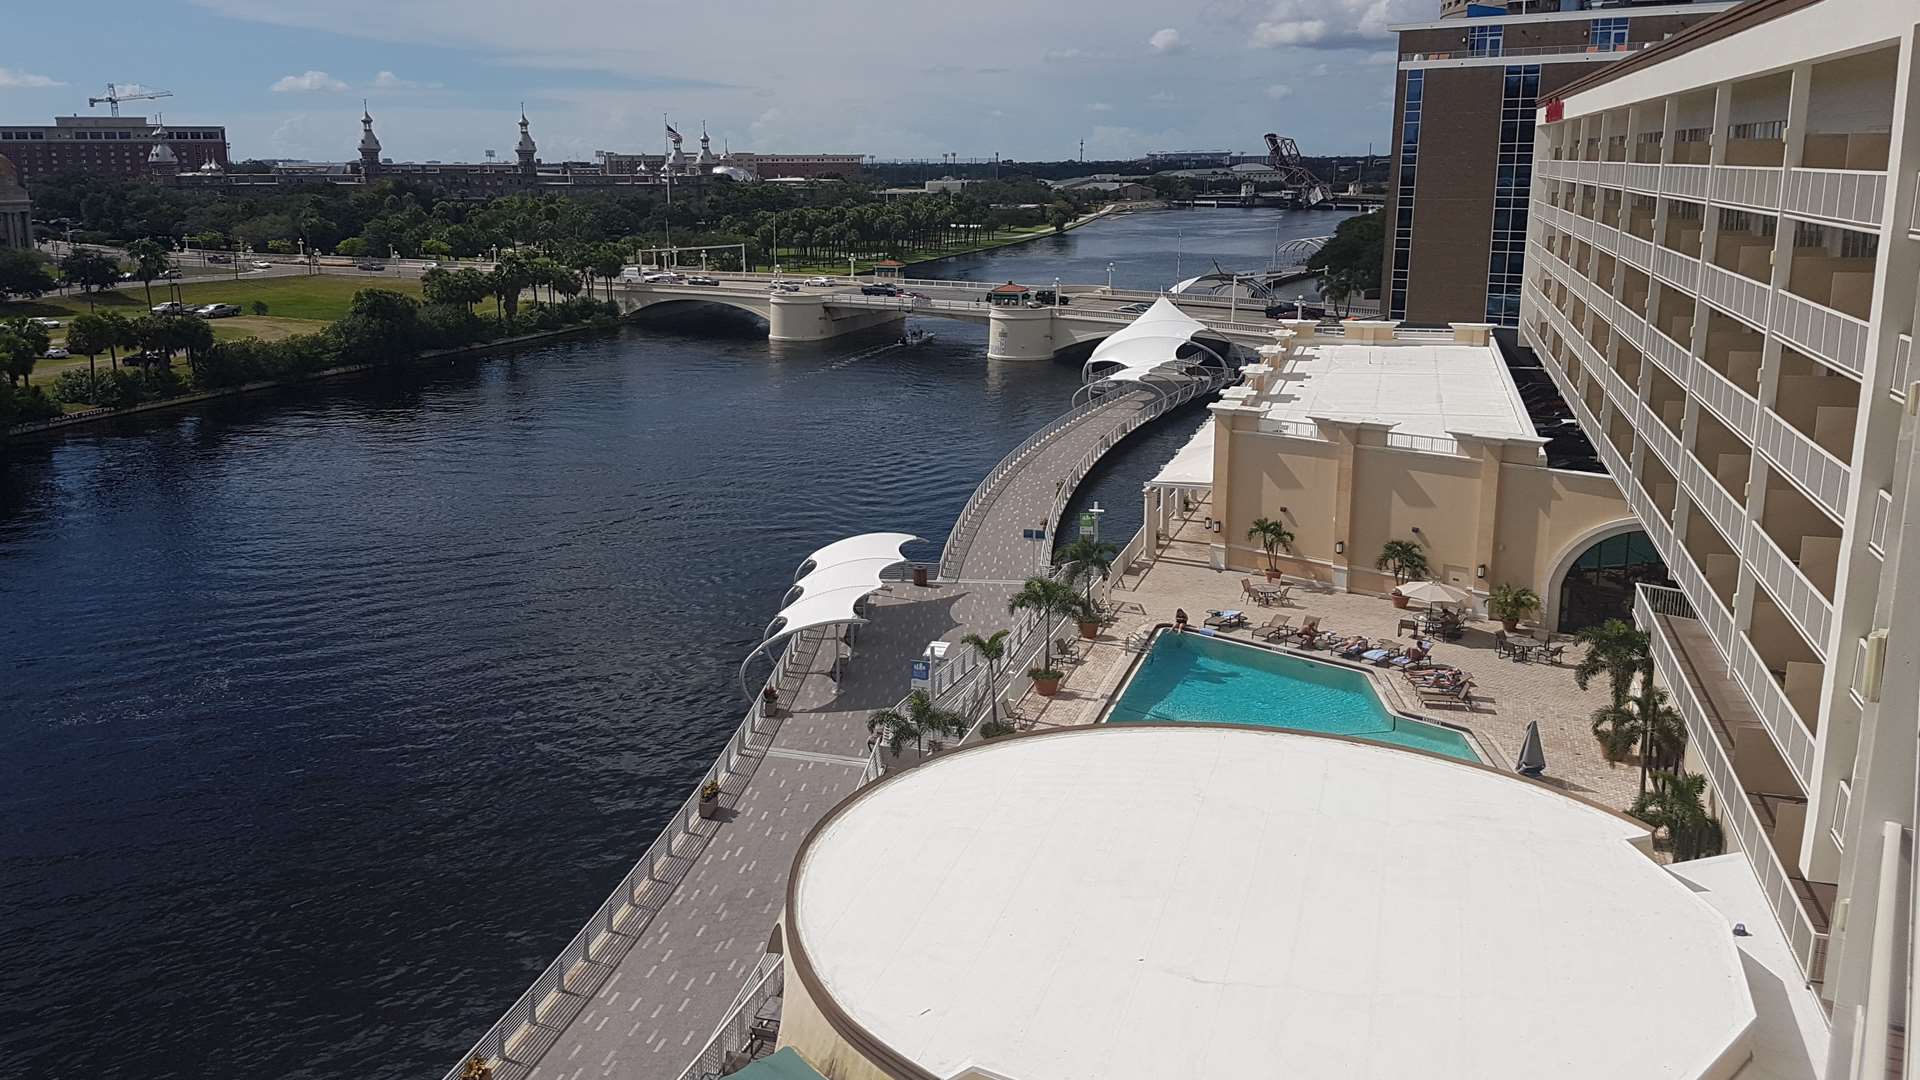 The view from our room at the Sheraton Tampa Riverwalk Hotel